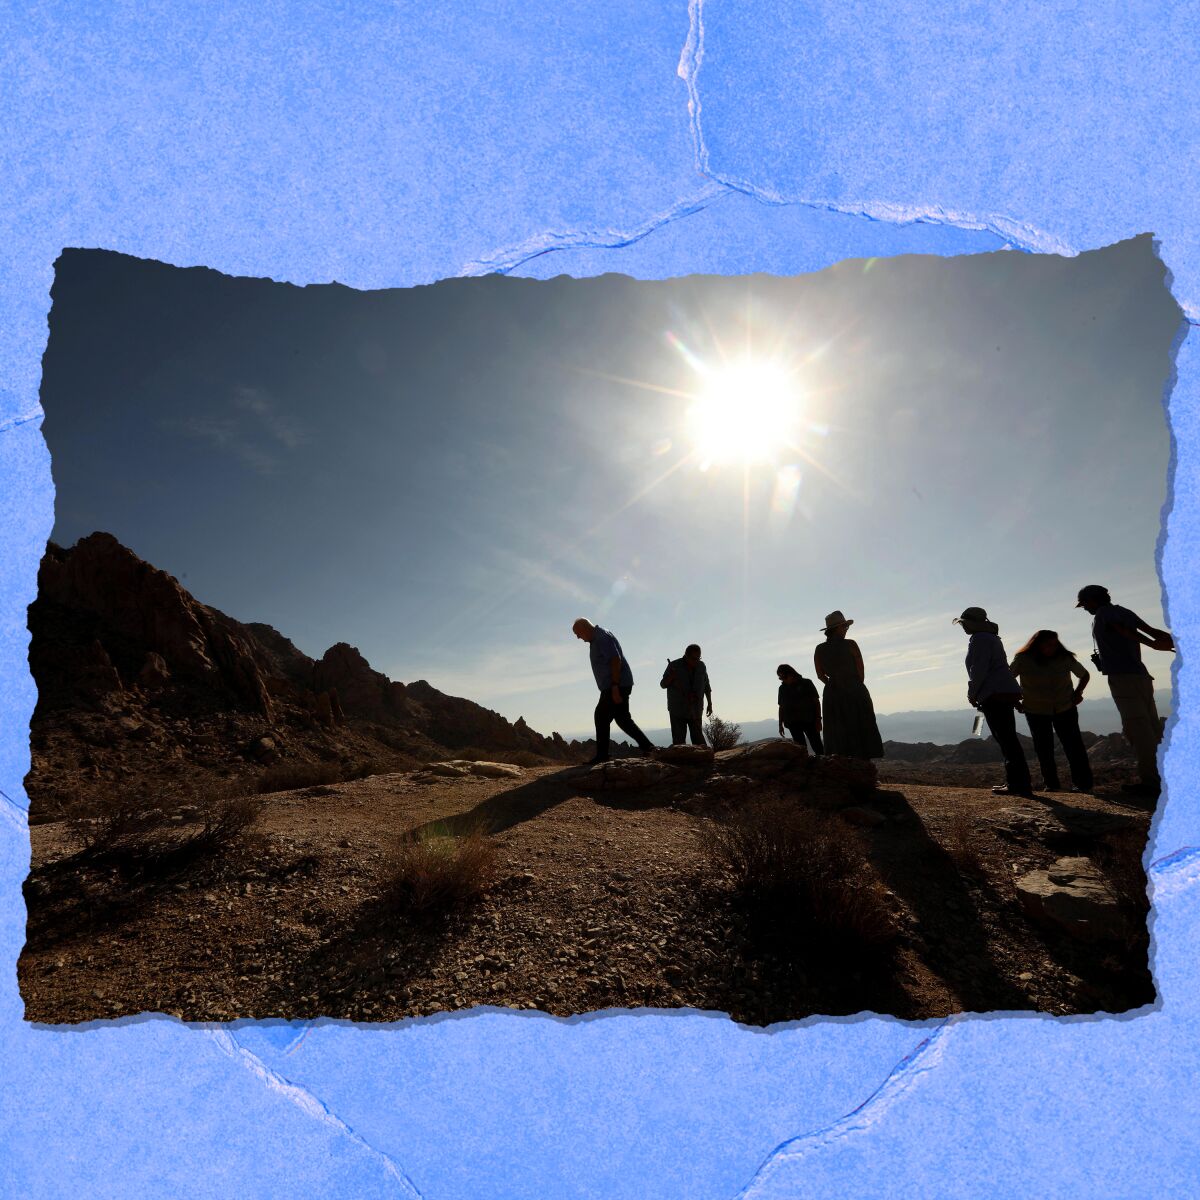 A group of people are seen on a hill in silhouette with the sun shining in the sky.